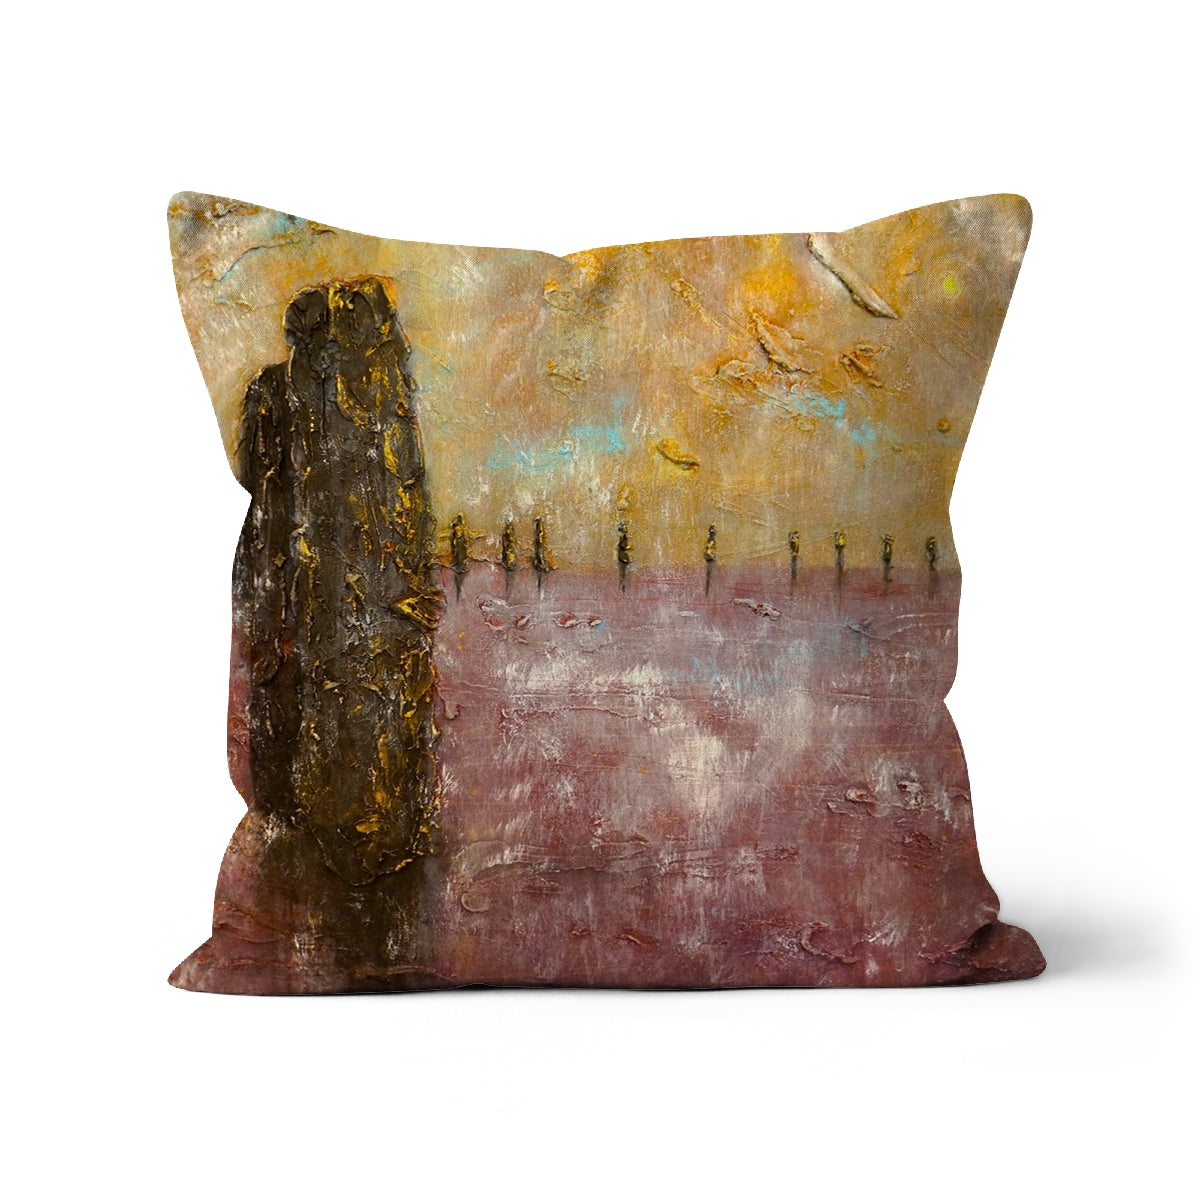 Bordgar Mist Orkney Art Gifts Cushion-Cushions-Orkney Art Gallery-Linen-12"x12"-Paintings, Prints, Homeware, Art Gifts From Scotland By Scottish Artist Kevin Hunter